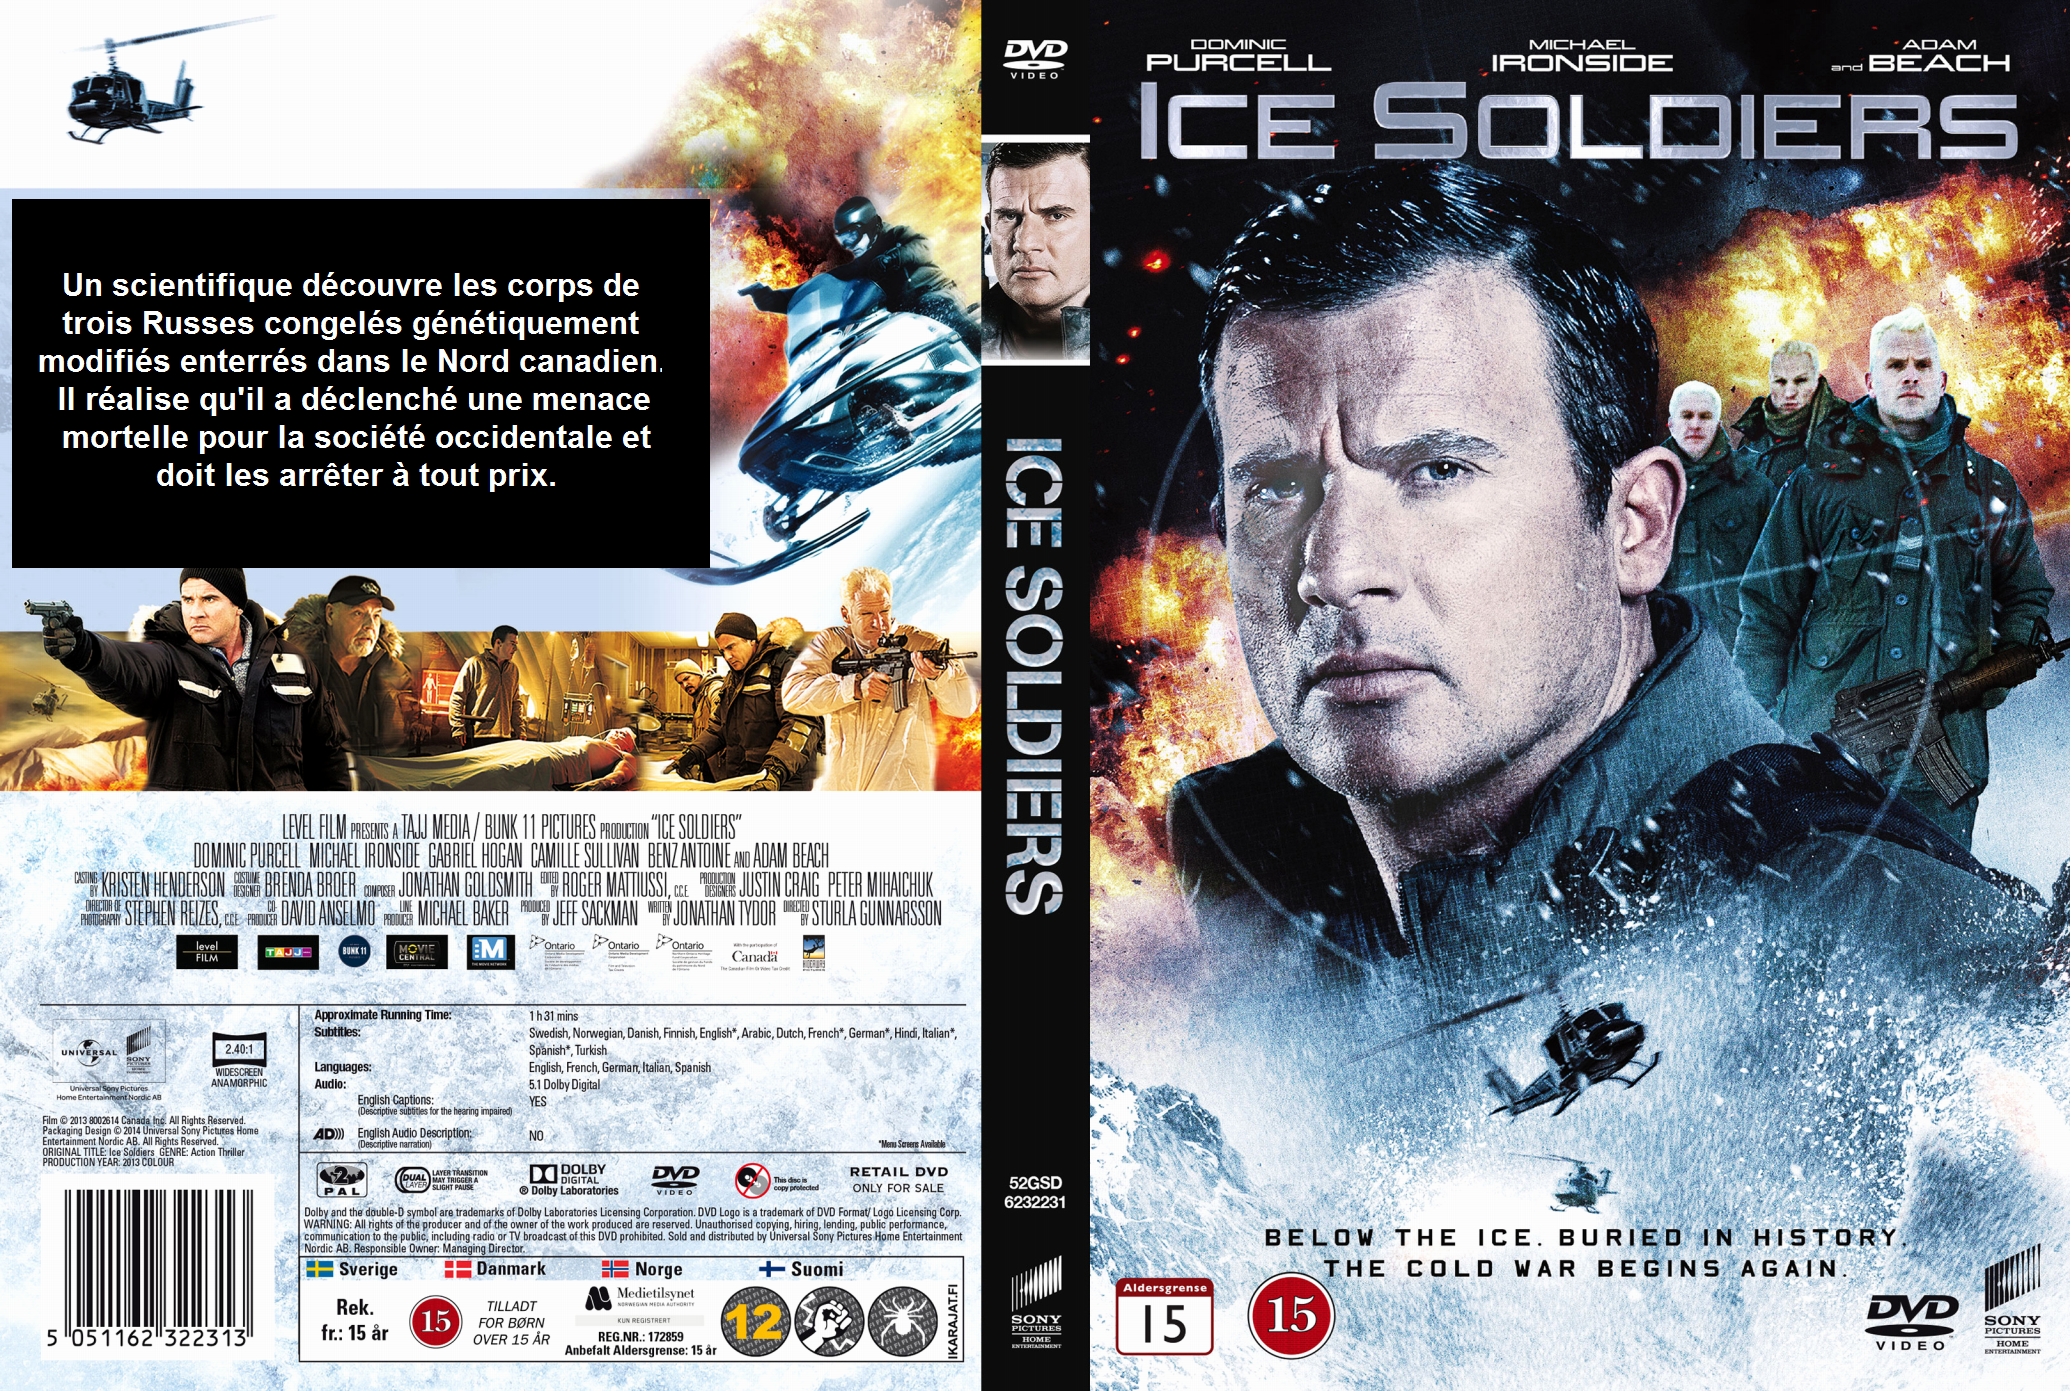 Jaquette DVD Ice soldiers custom v2